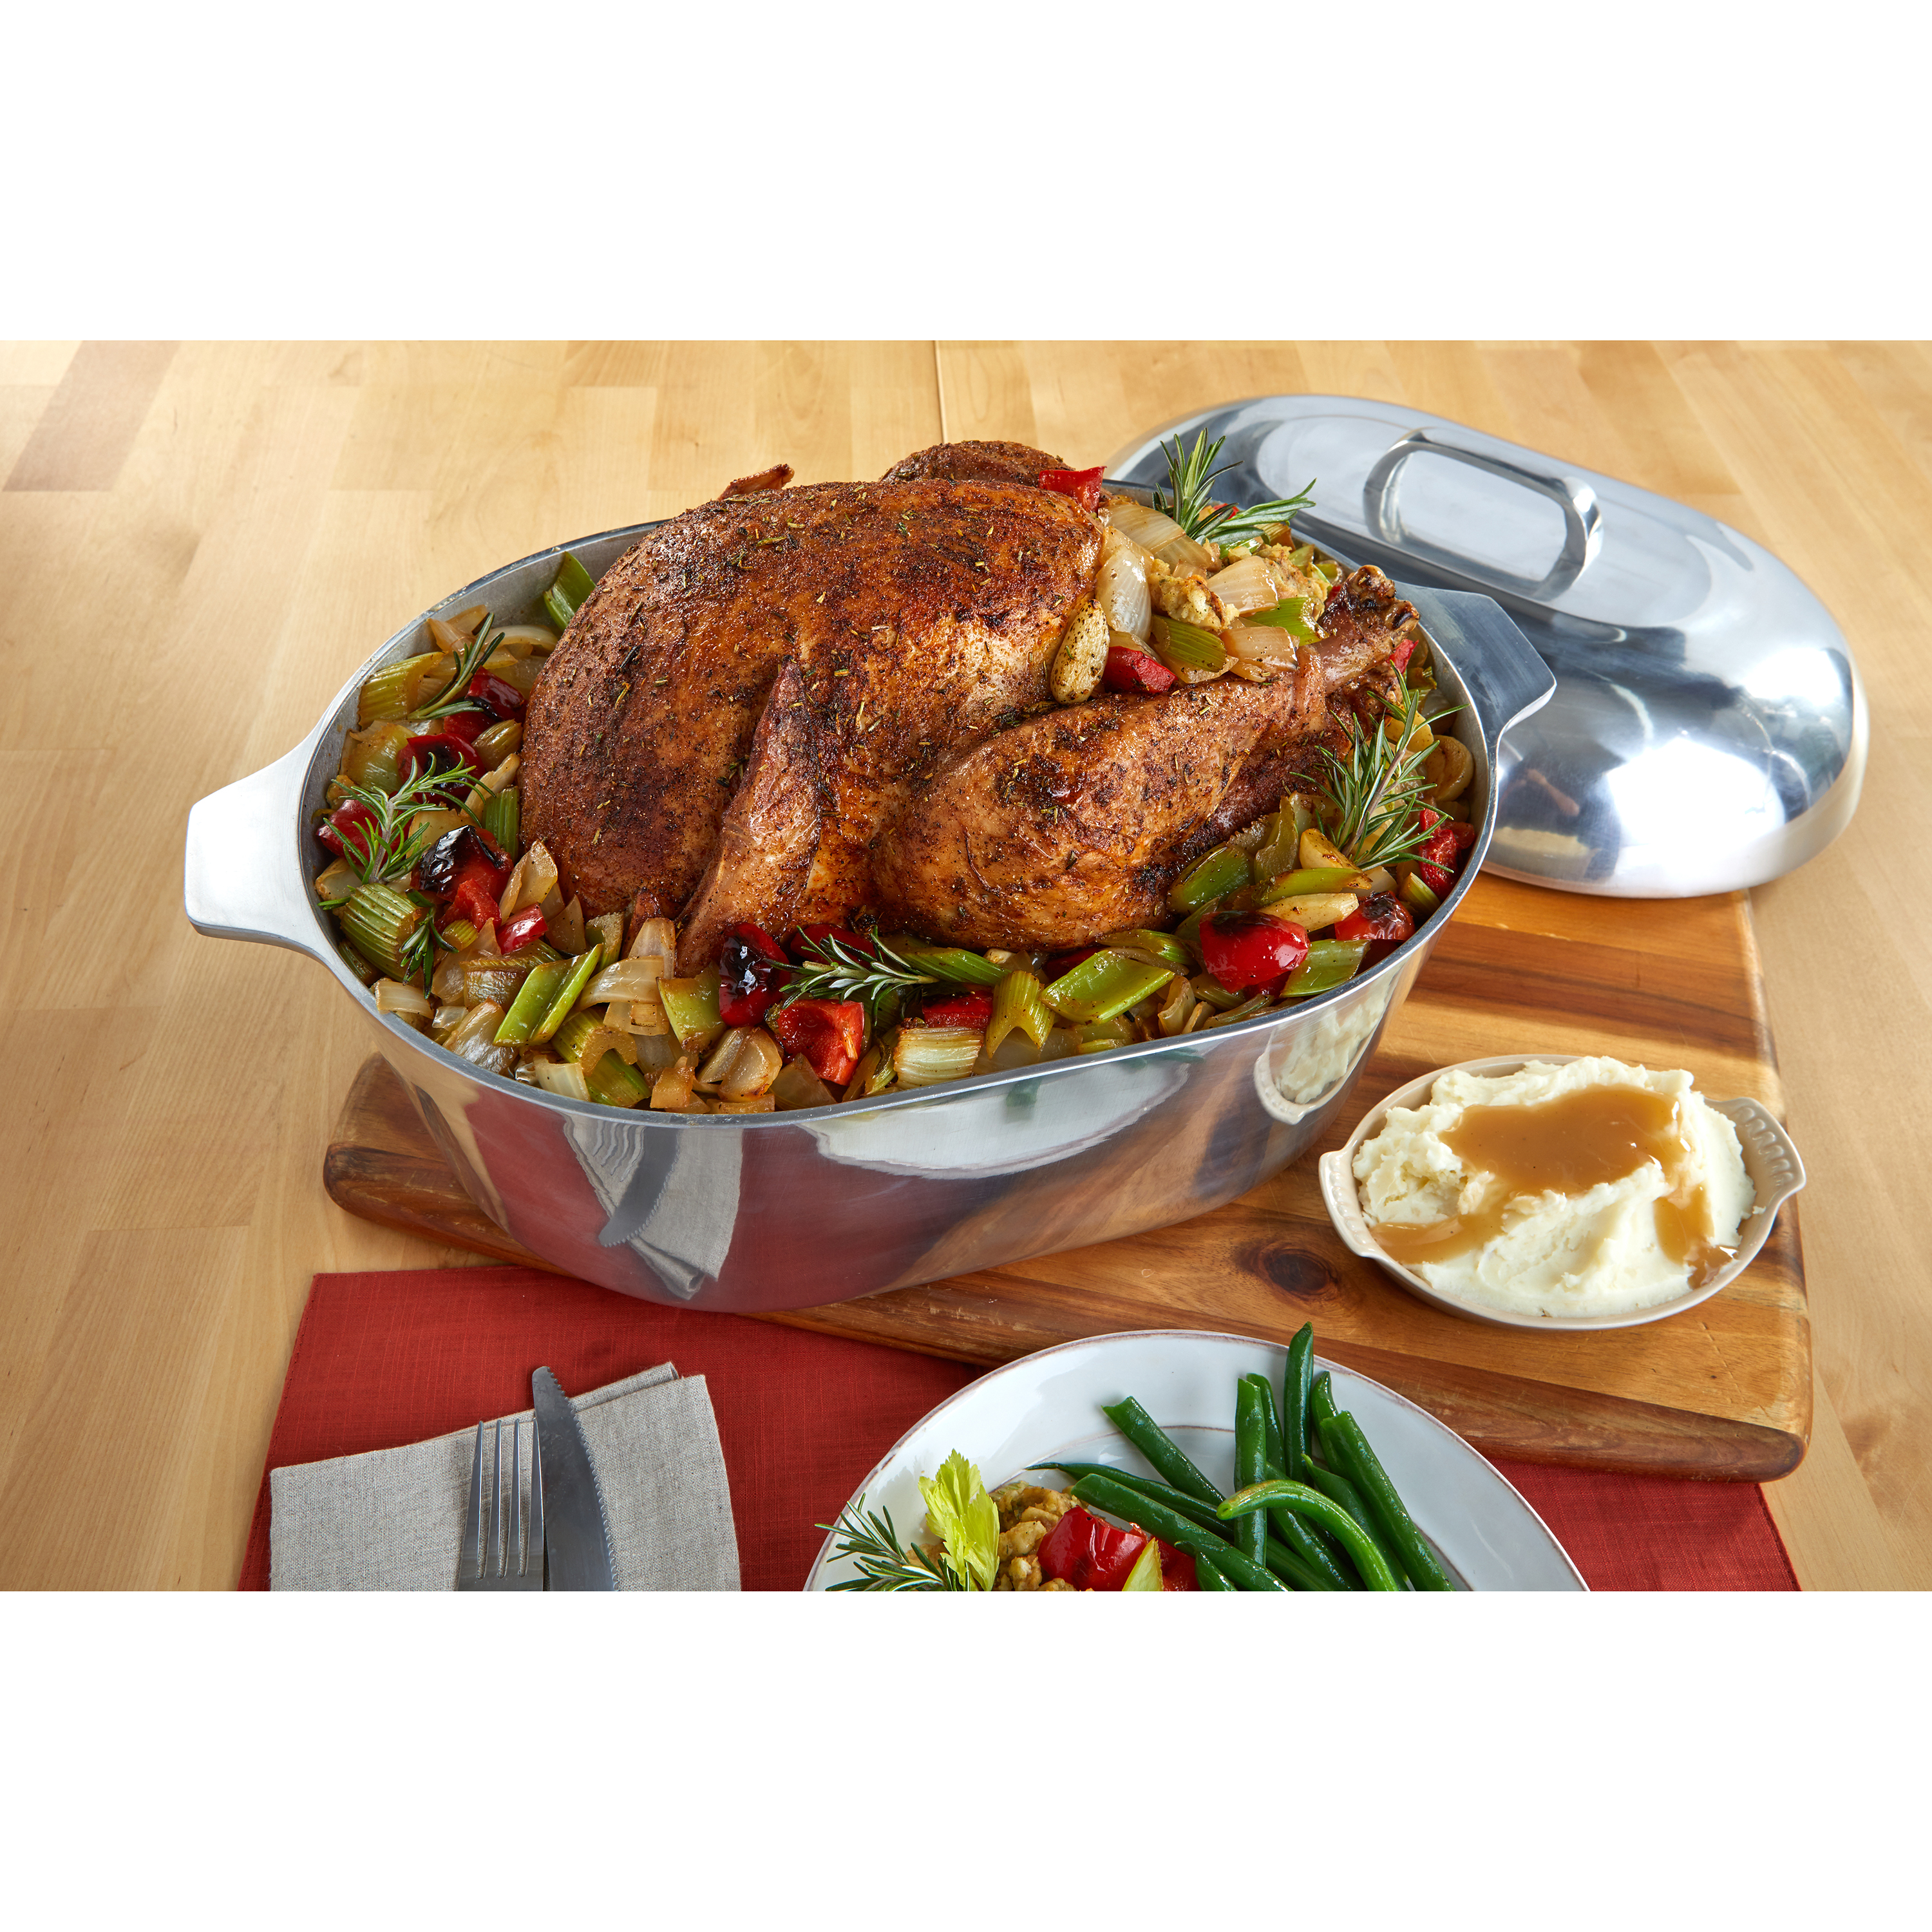 Imusa 15 inch Cajun Oval Heavy Duty Cast Aluminum Roaster Pan with Lid and  Roasting Tray, 1 Count 